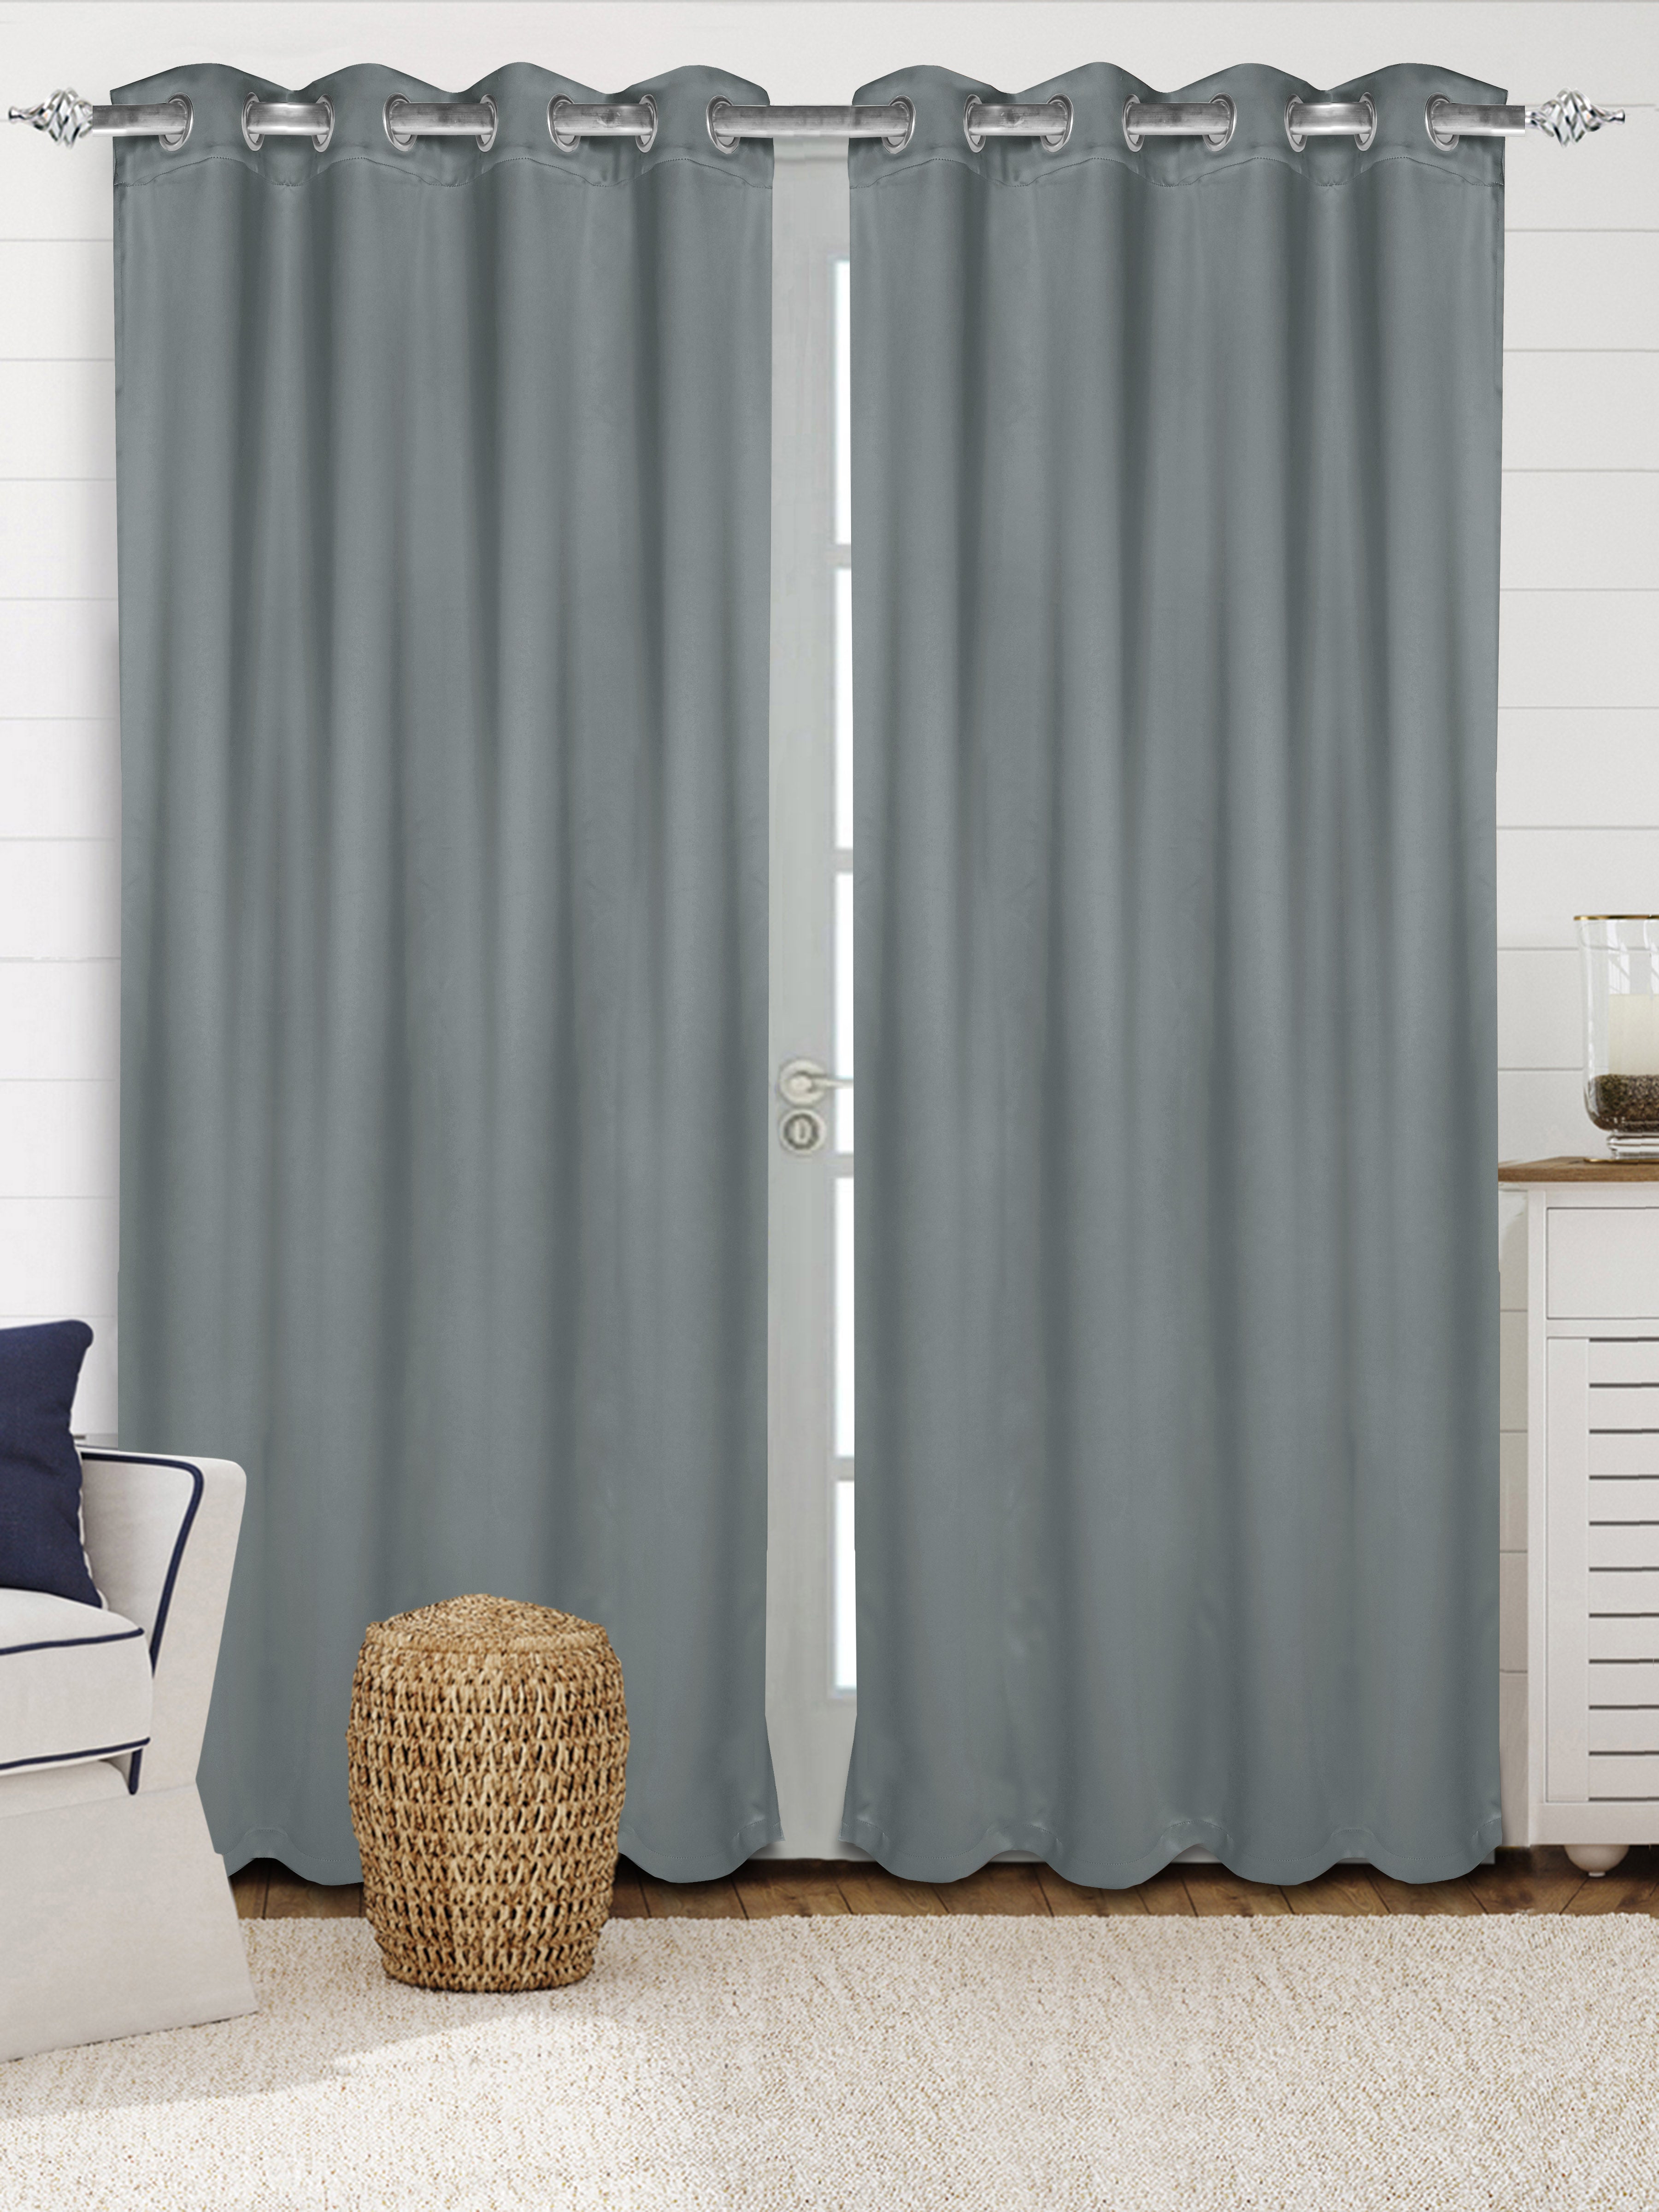 Buy Blackout Curtains Online, Best Quality